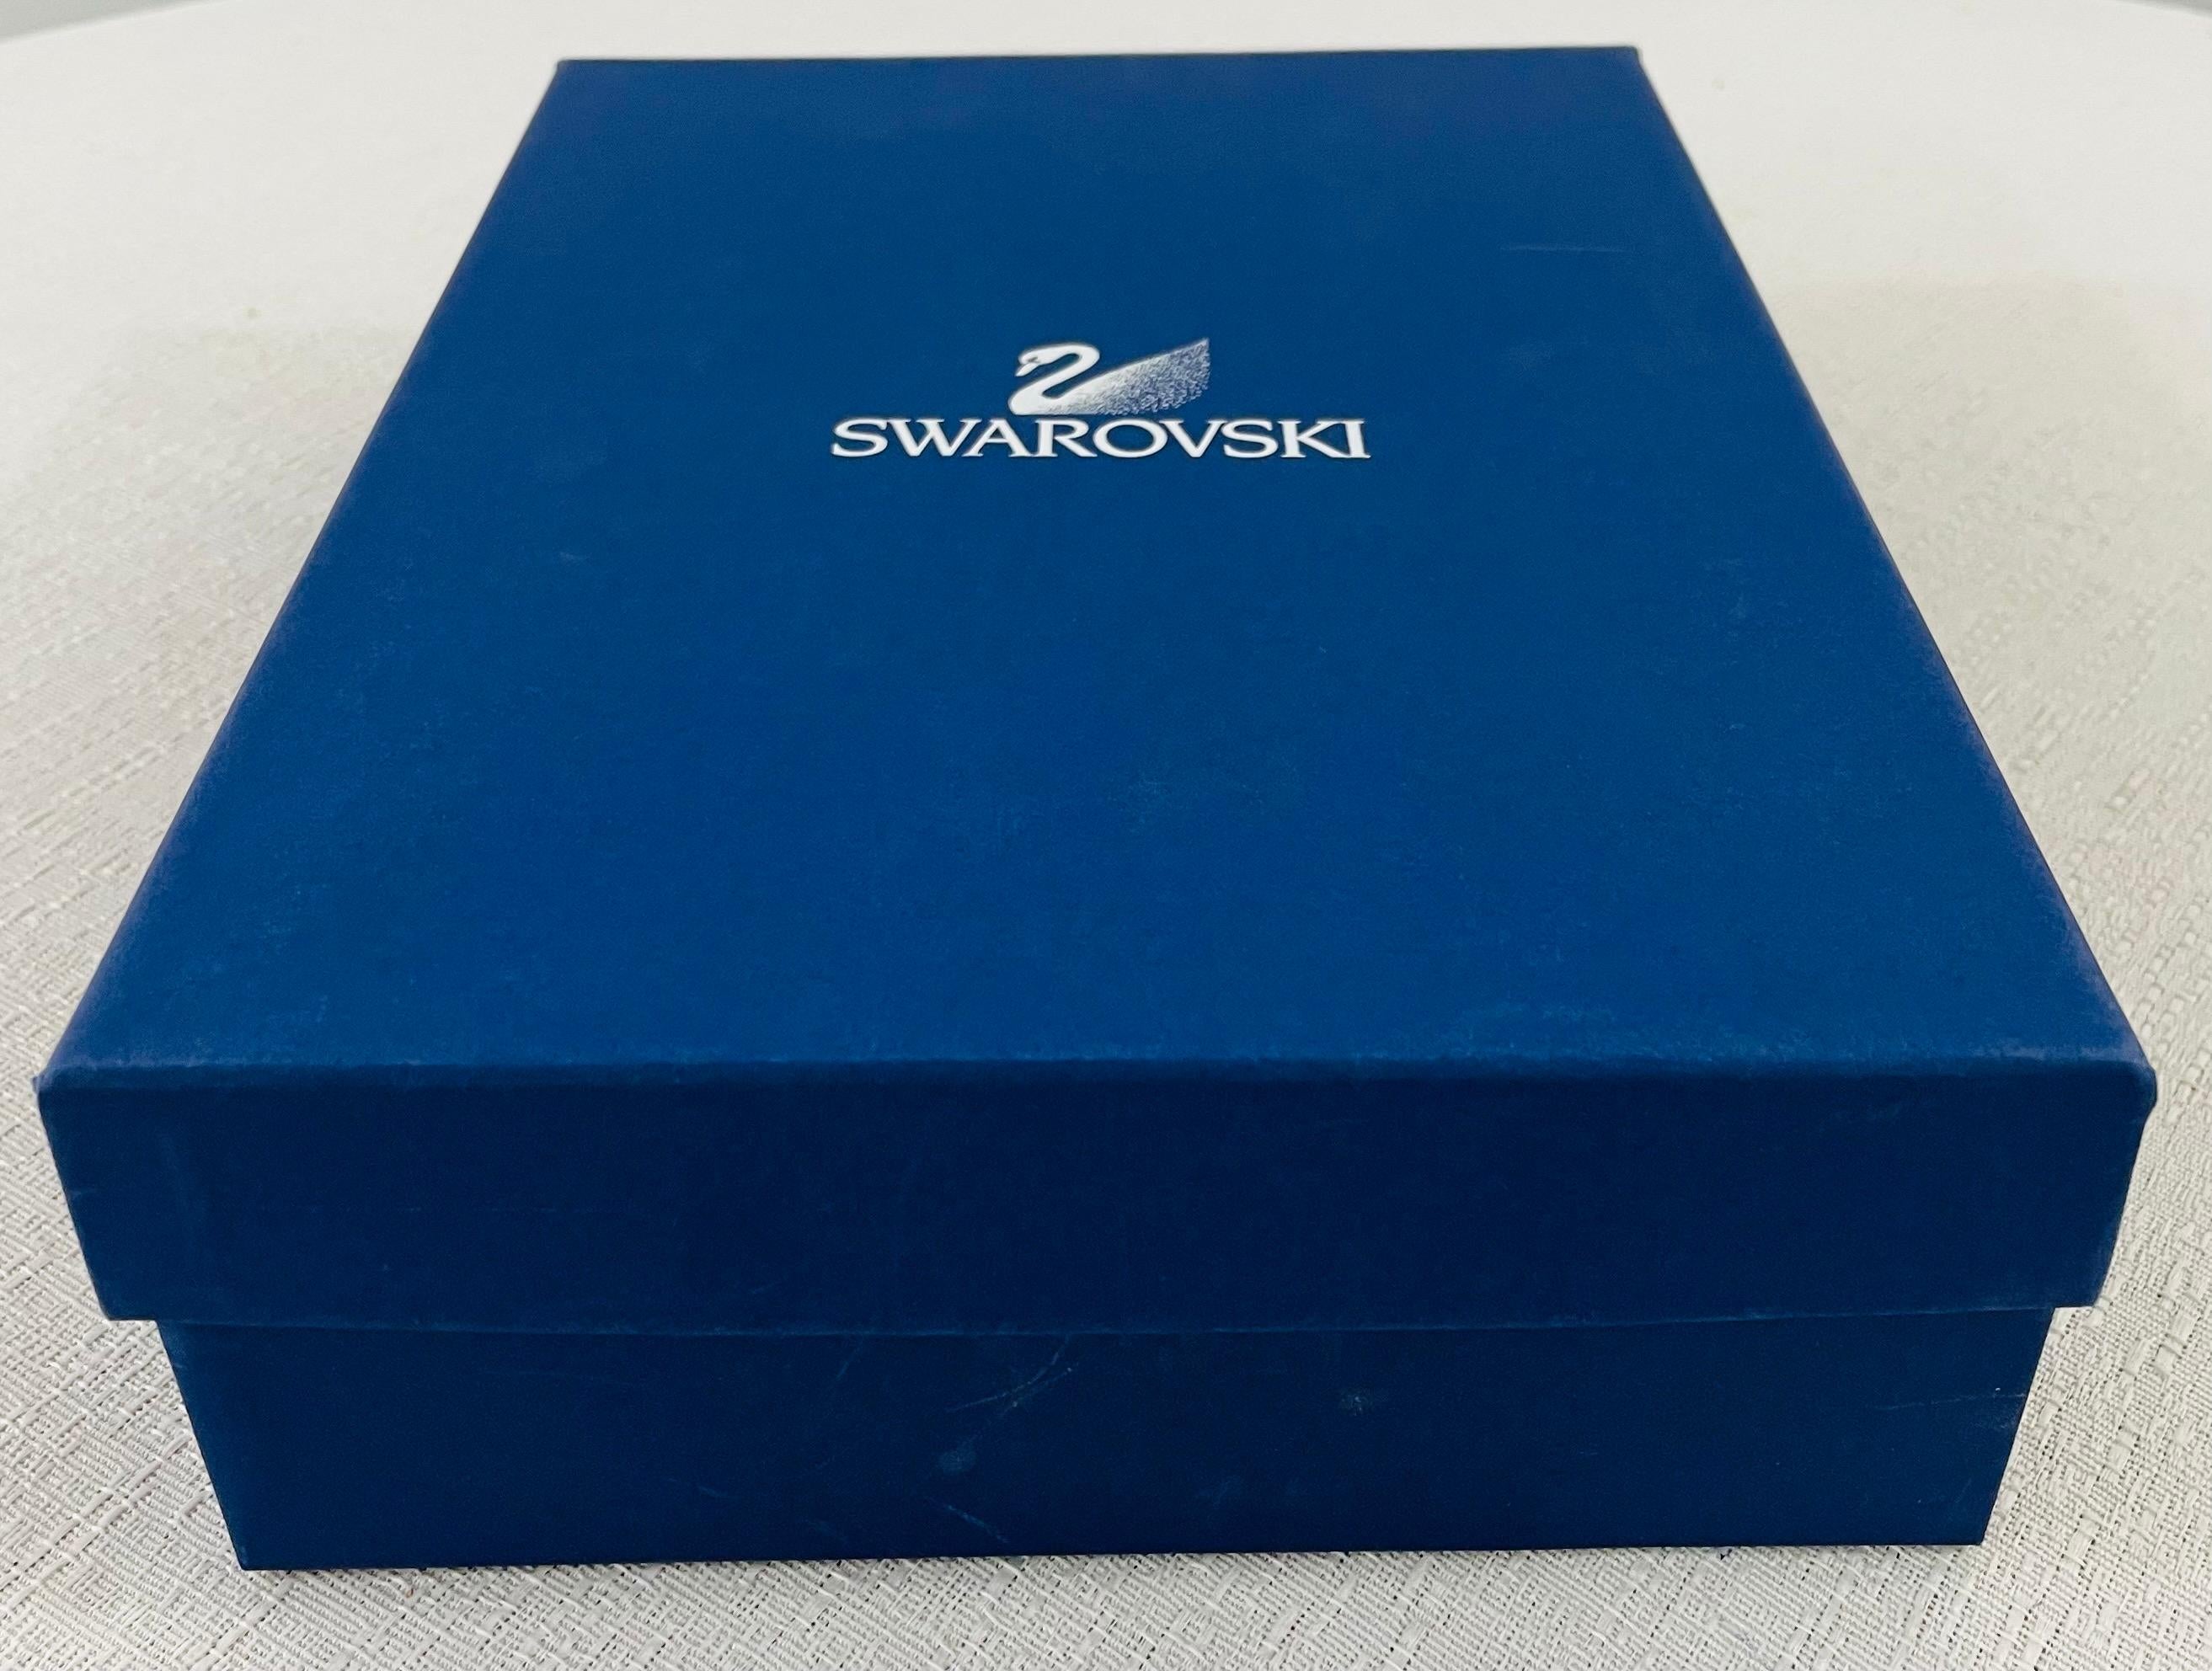 A rare retired model of Swarovski crystal figurine Christmas tree topper set presented in its original blue box with certificate of authenticity. Designed by Elke Kumar and handmade in Austria, this collectible piece was part of the 